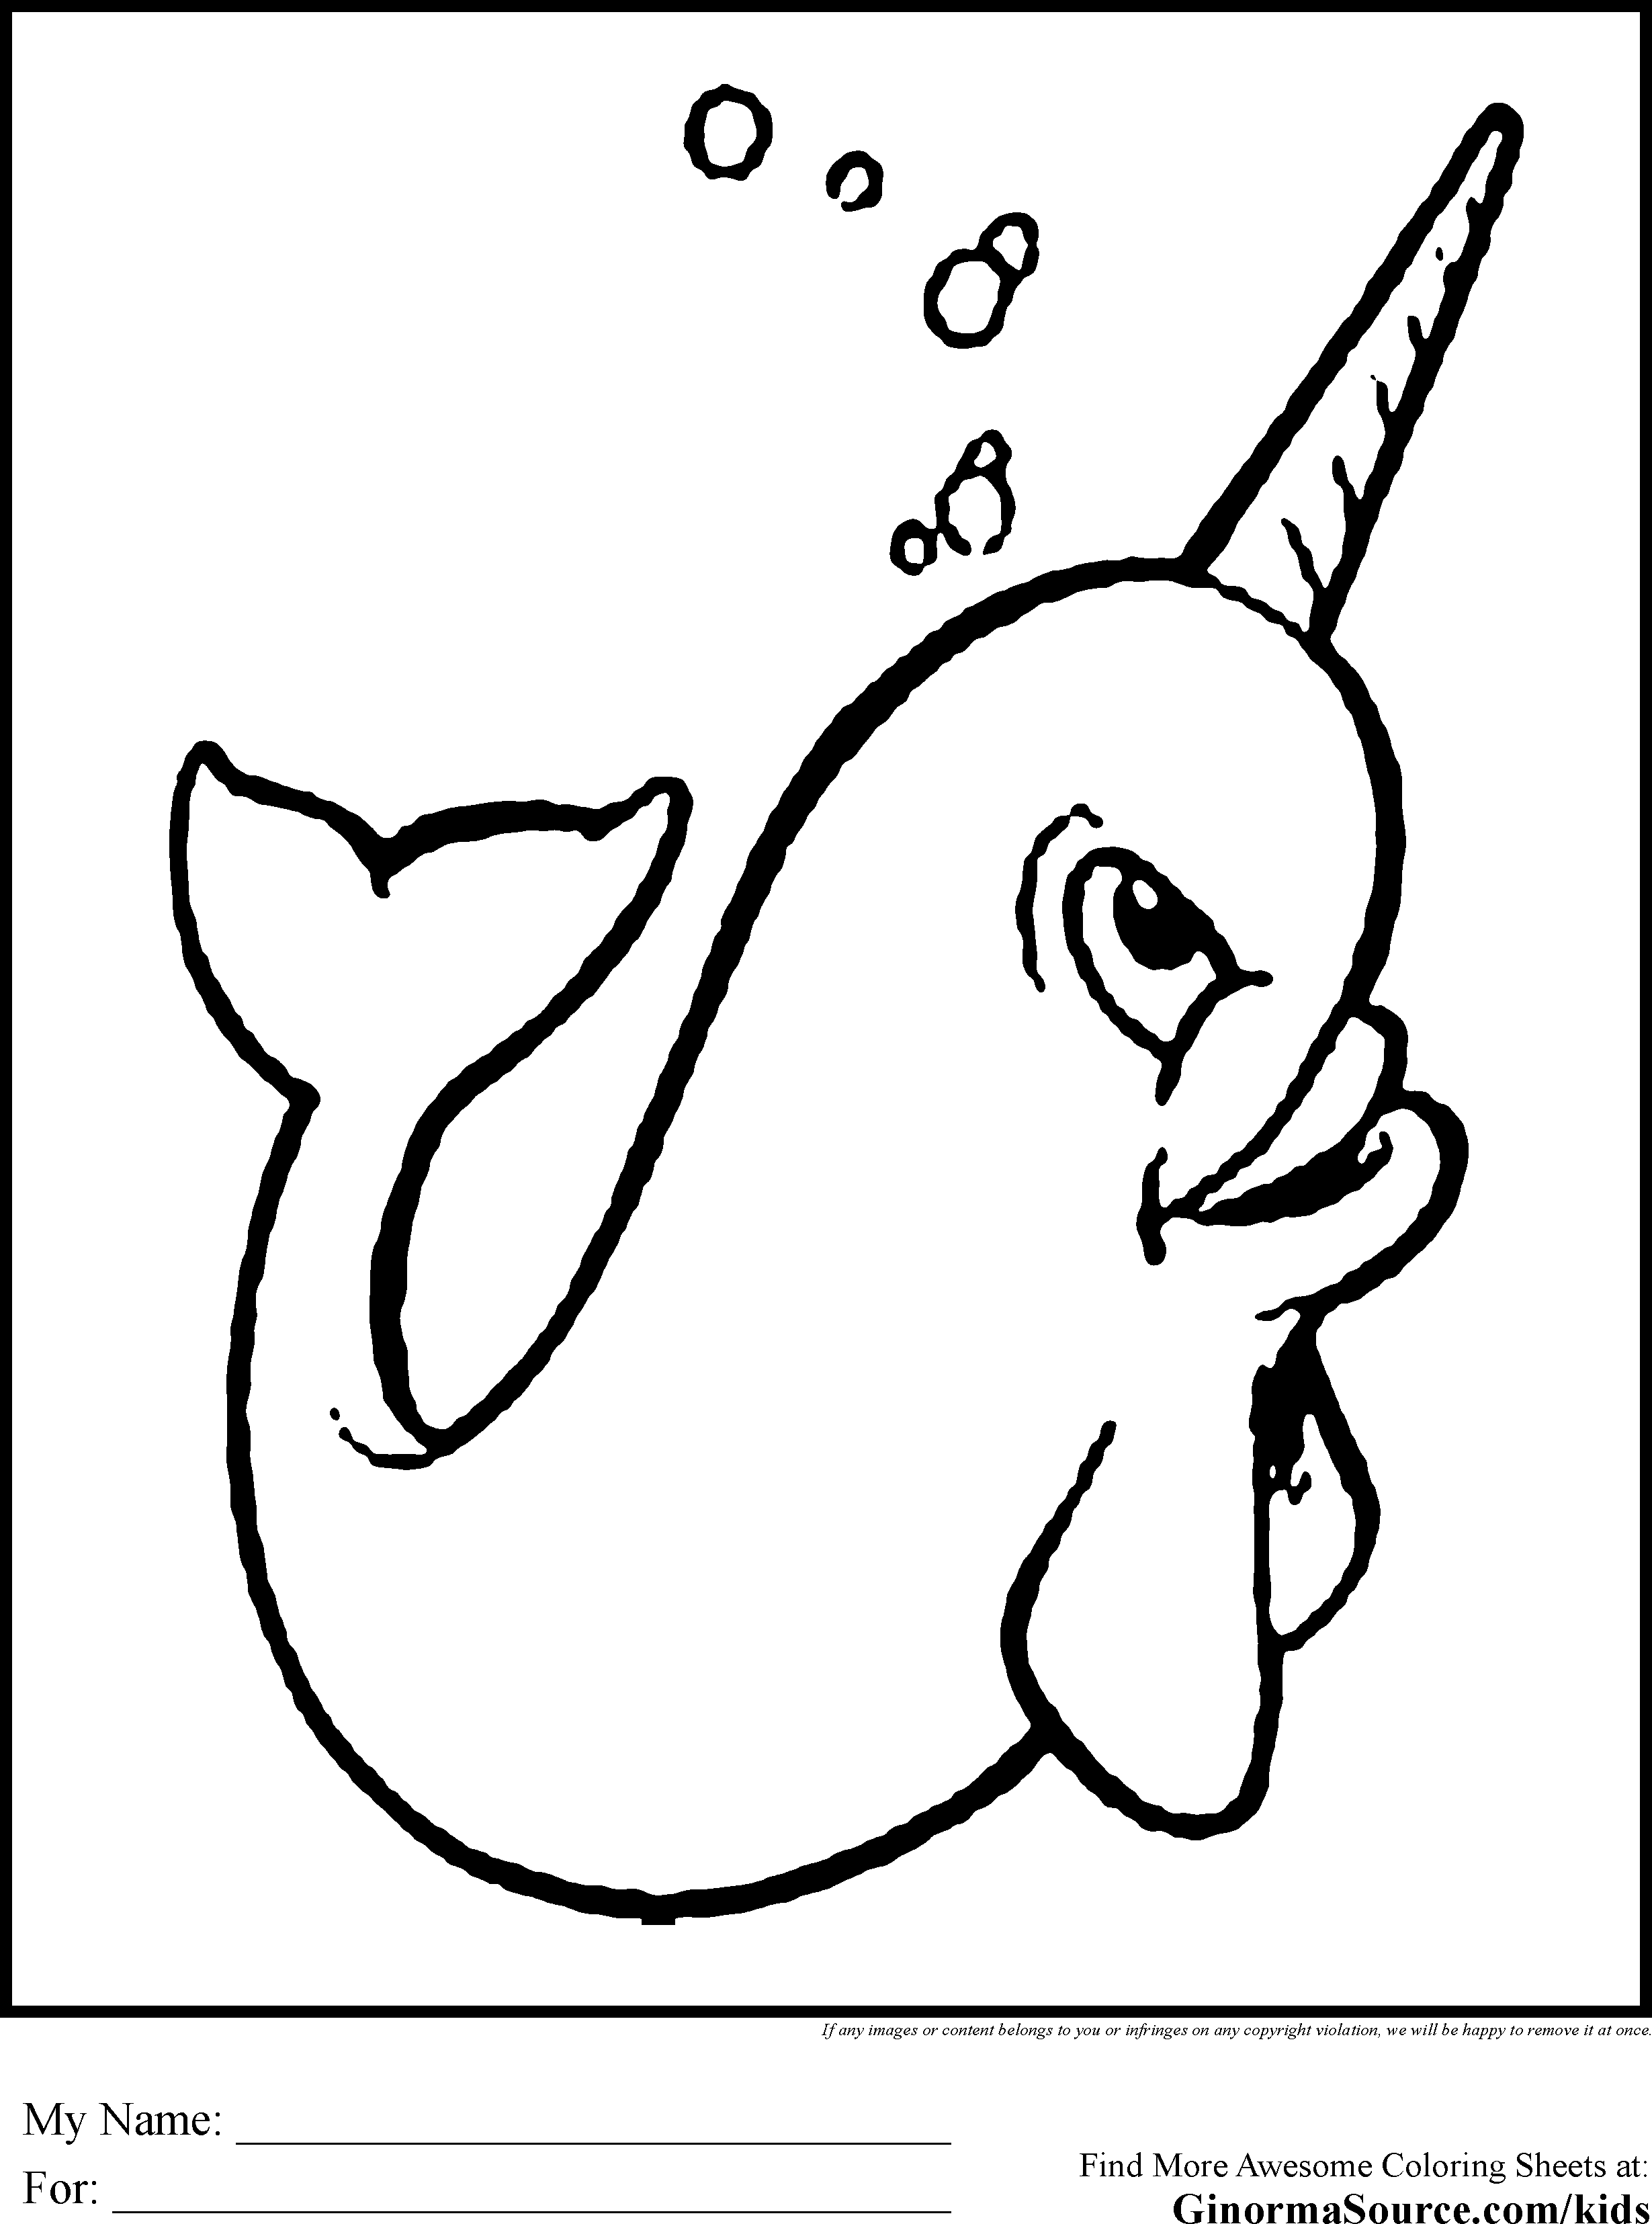 Narwhal Coloring Pages   GINORMAsource Kids   Unicorn Coloring ...